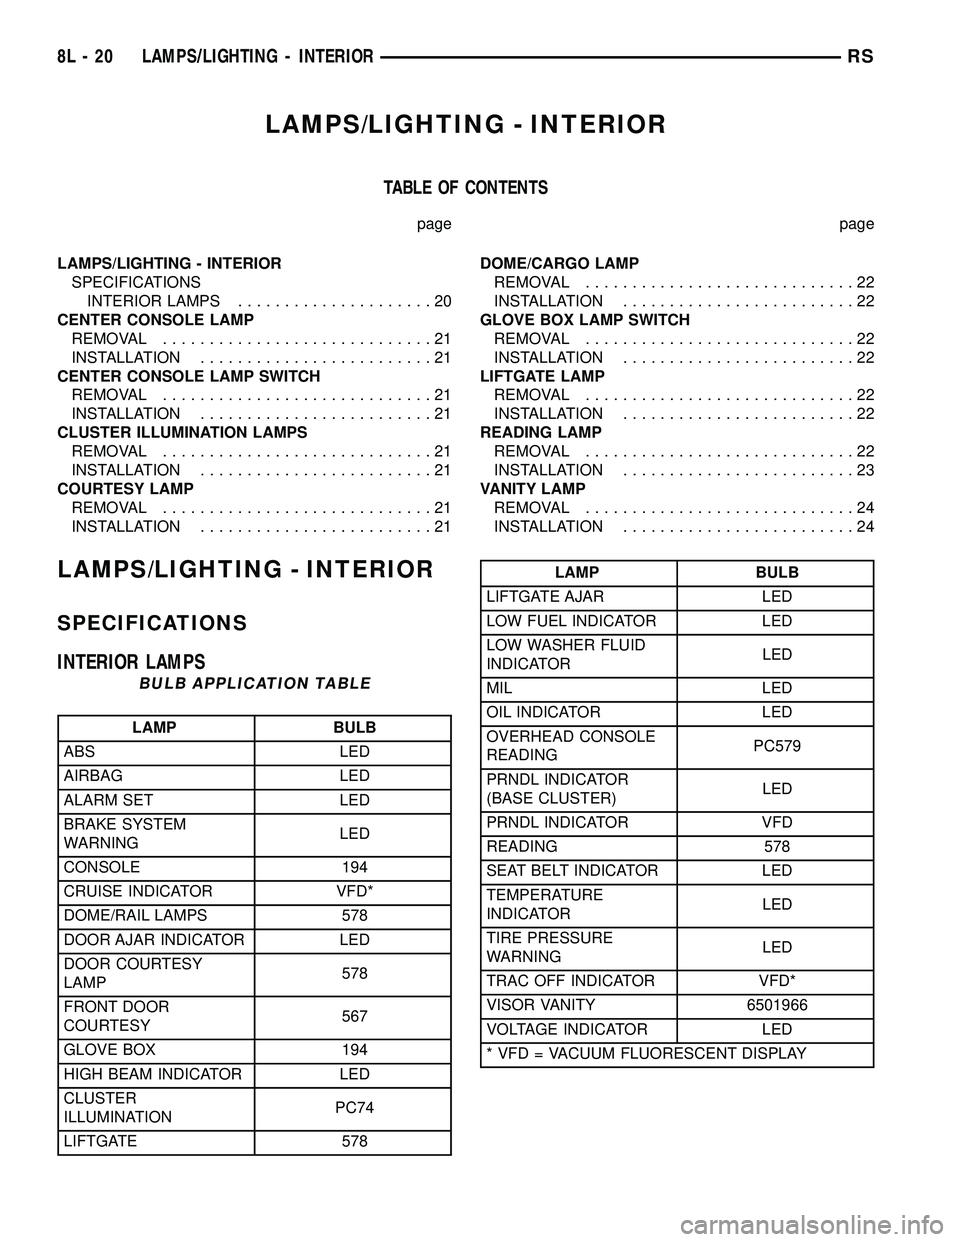 CHRYSLER VOYAGER 2005  Service Manual LAMPS/LIGHTING - INTERIOR
TABLE OF CONTENTS
page page
LAMPS/LIGHTING - INTERIOR
SPECIFICATIONS
INTERIOR LAMPS.....................20
CENTER CONSOLE LAMP
REMOVAL.............................21
INSTALLA